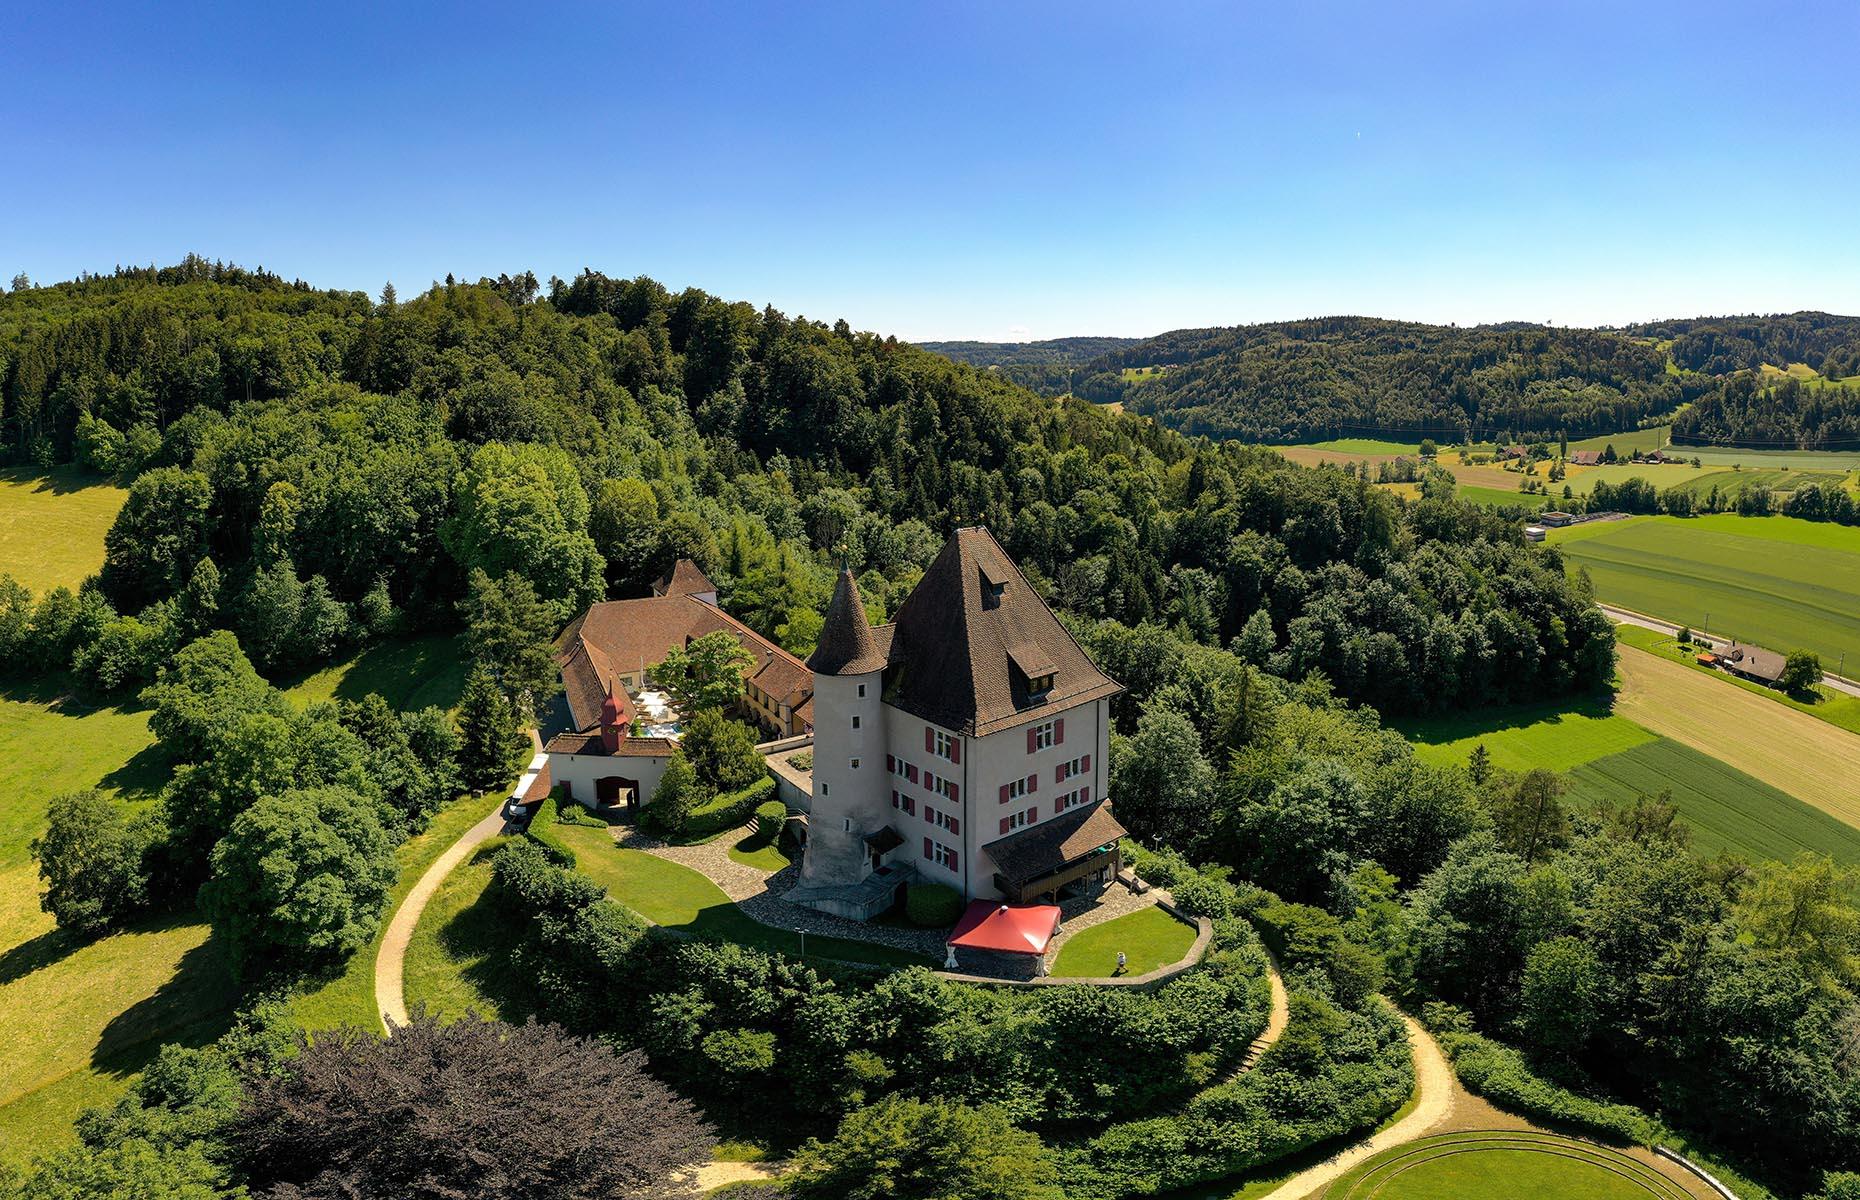 If it's related to witches, you'll find it in this enchanting Swiss museum. Through its 1,300-strong collection of artifacts, the museum allows visitors to delve into the worlds of Swiss folklore, divination, magic spells, healing practices and more. It gets bonus points for its killer location in the hilltop Liebegg Castle (pictured) too.